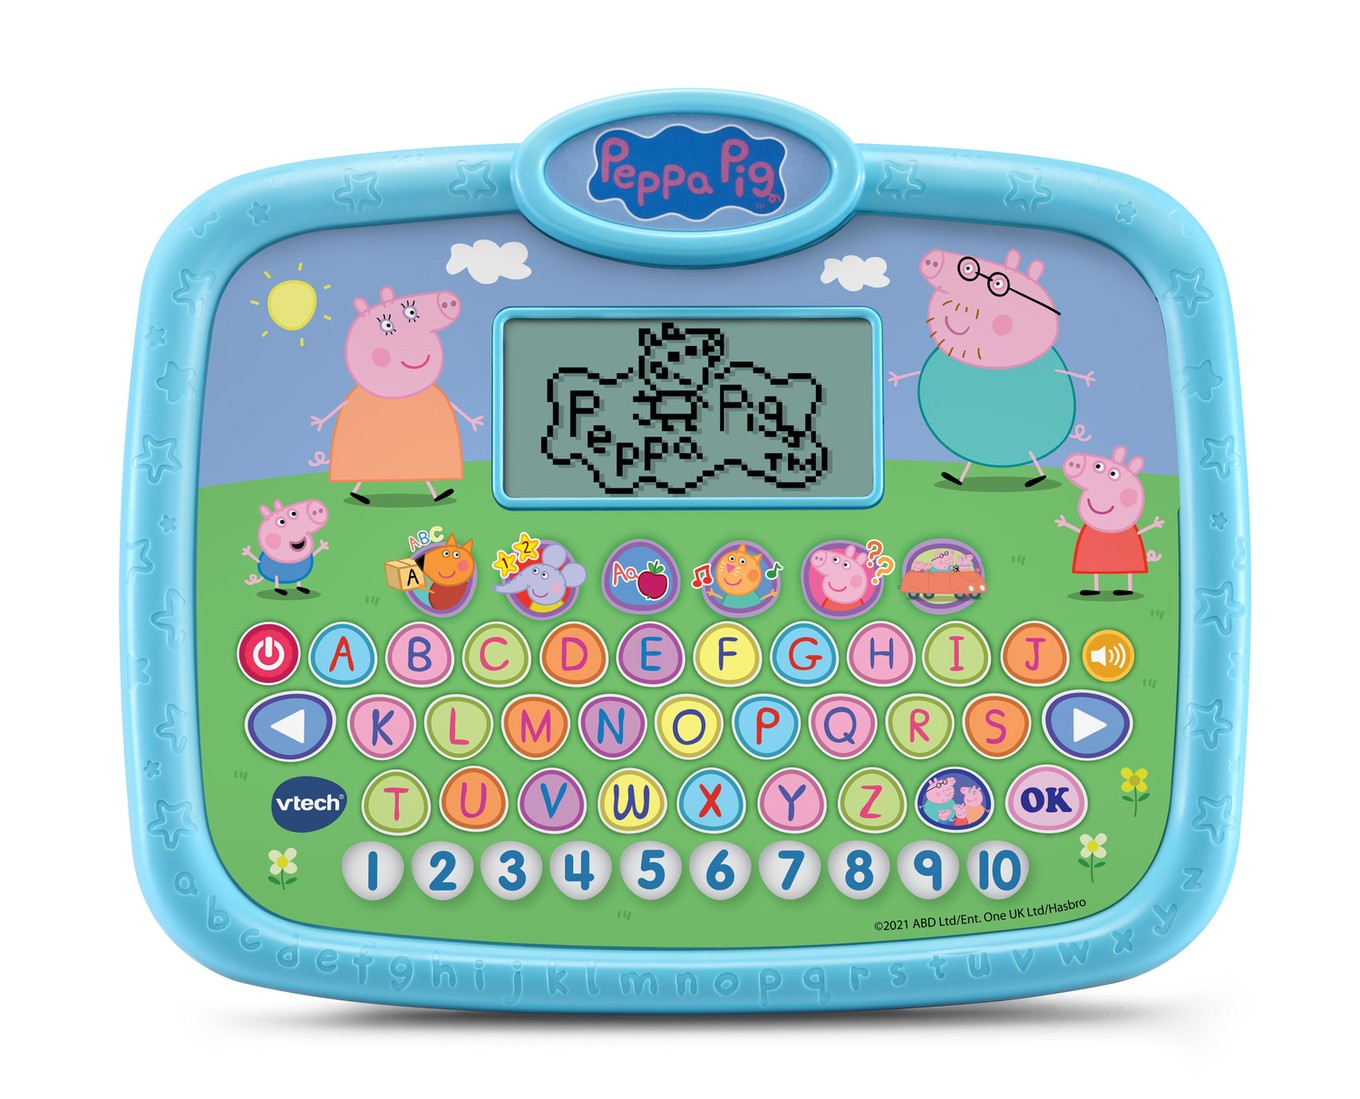 VTech® Peppa Pig Learn & Explore Tablet Alphabet and Phonics Toy